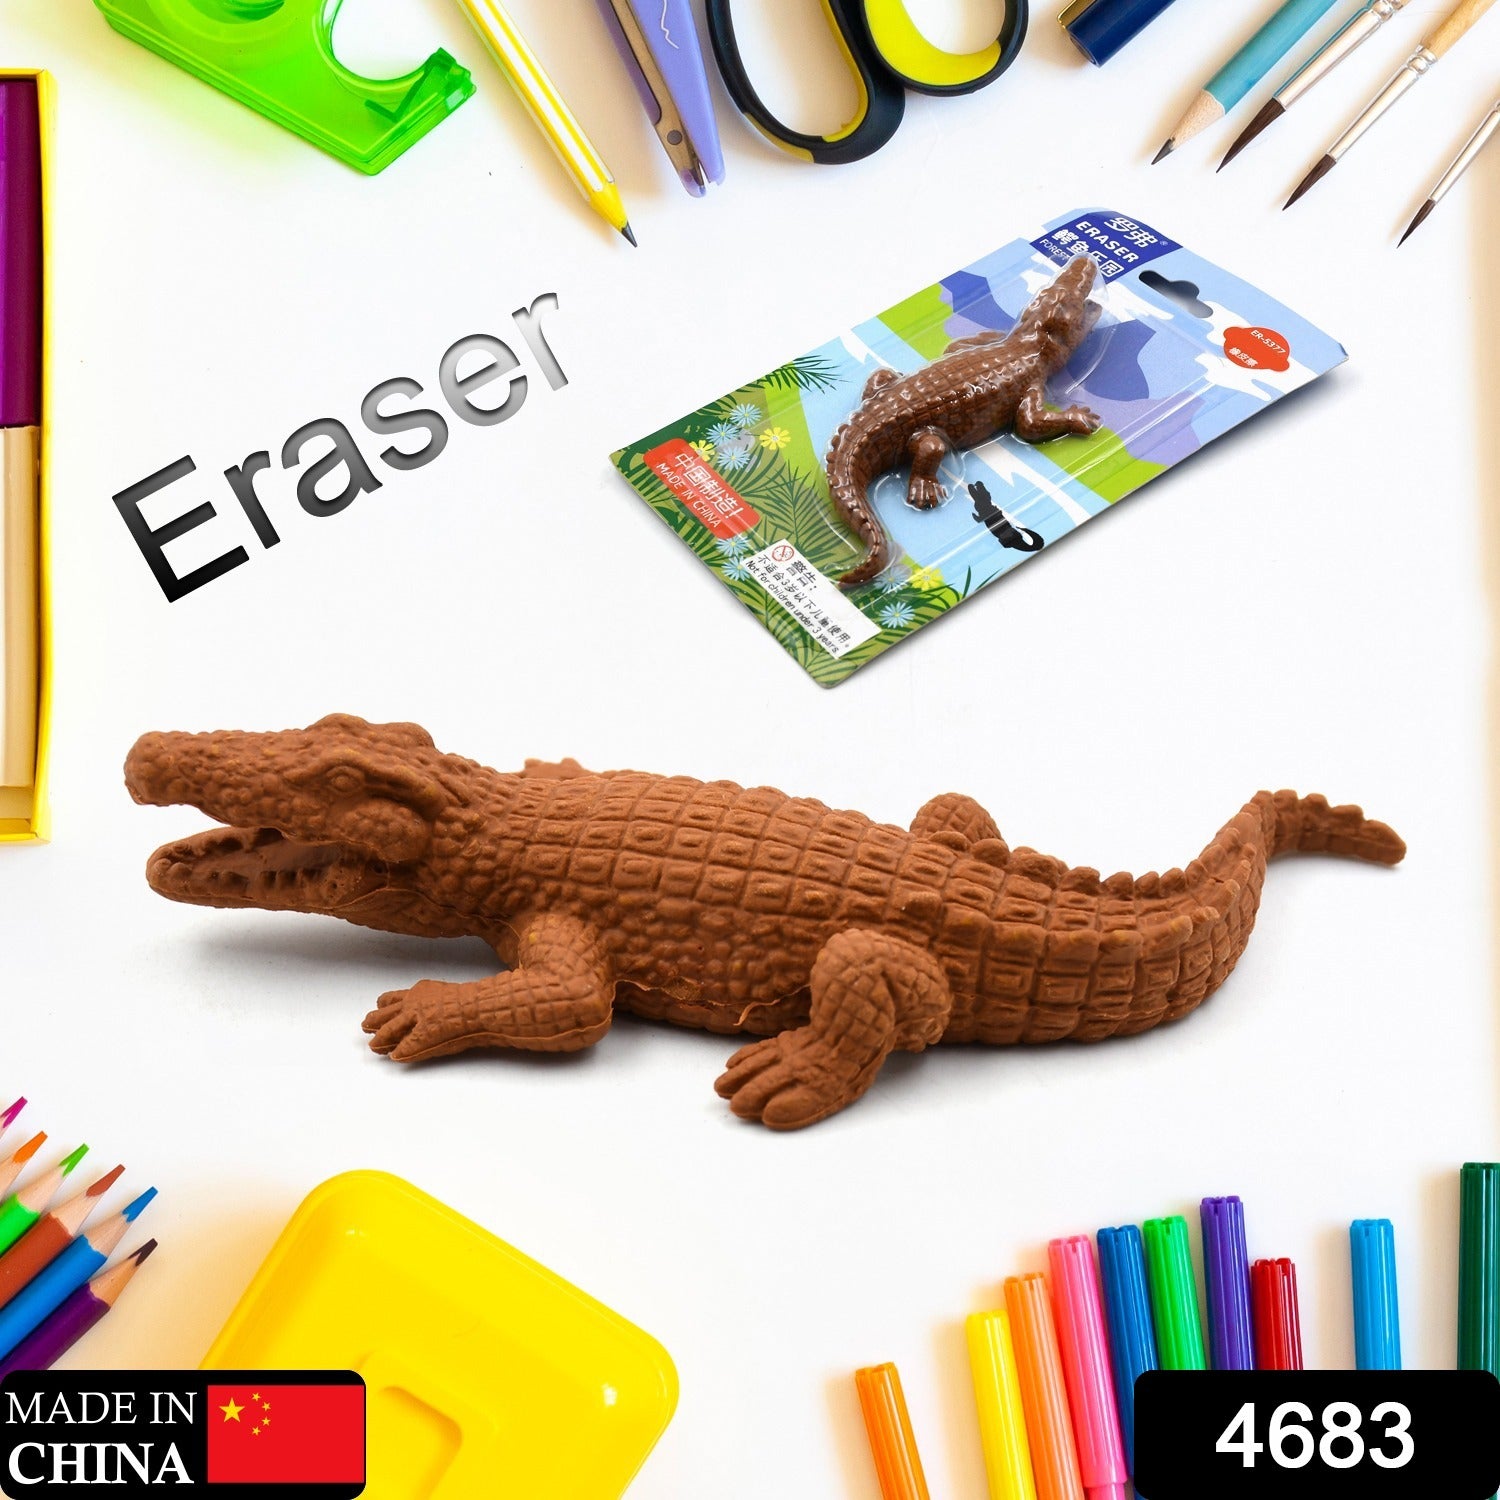 4683  CROCODILE SHAPED ERASERS ANIMAL ERASERS FOR KIDS, CROCODILE ERASERS 3D ERASER, MINI ERASER TOYS, DESK PETS FOR STUDENTS CLASSROOM PRIZES CLASS REWARDS PARTY FAVORS